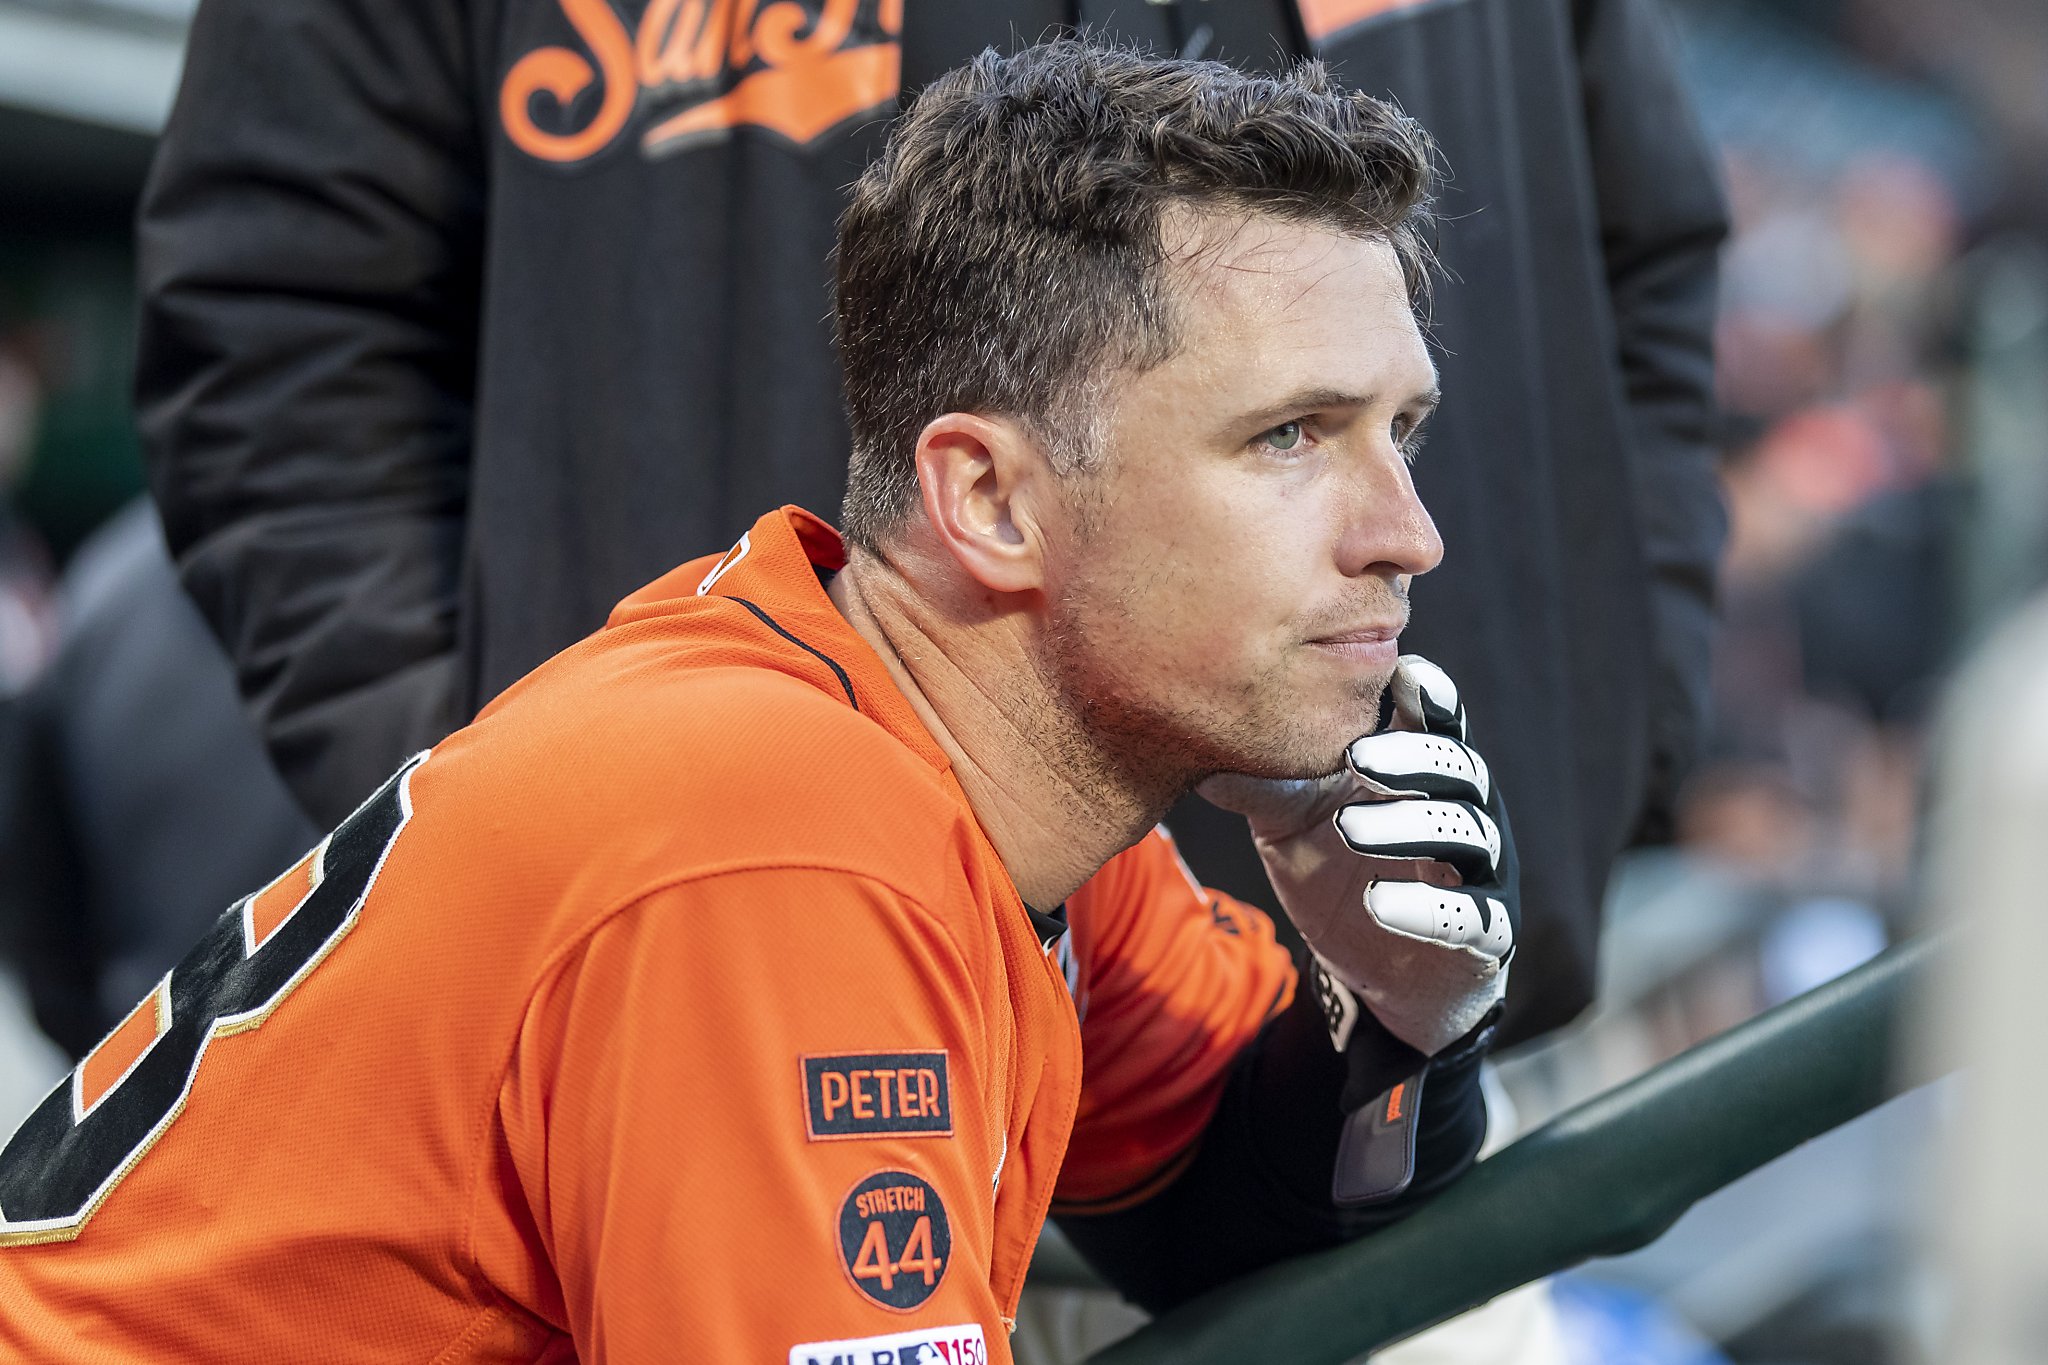 Buster Posey a Giant influence on San Francisco's resurgence